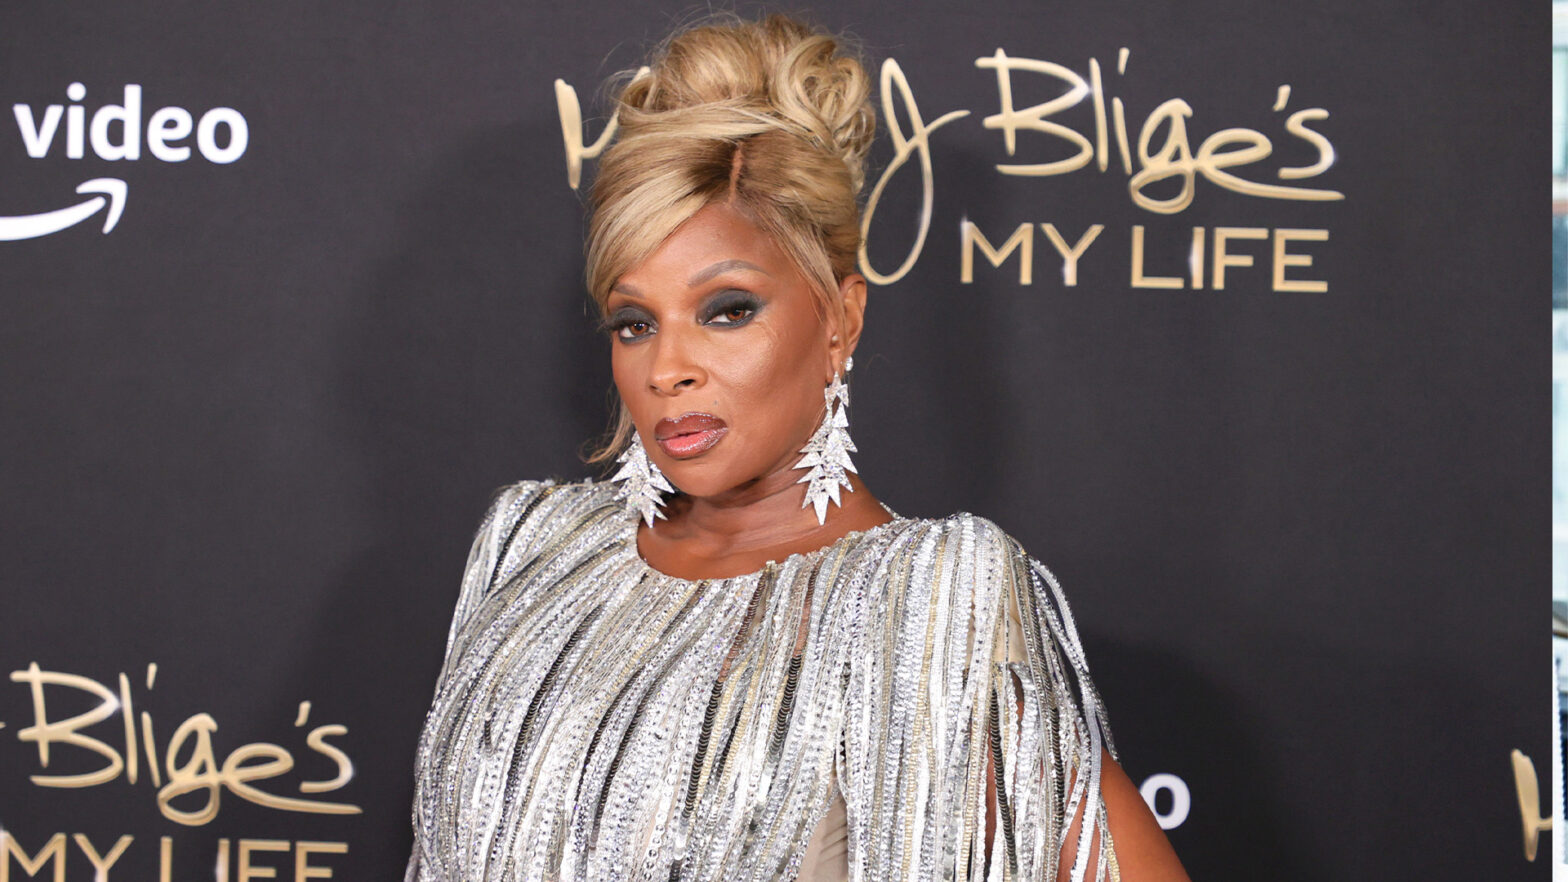 Mary J. Blige Recalls Drowning In 'Hundreds Of Millions Of Dollars' In Debt Owed To The IRS